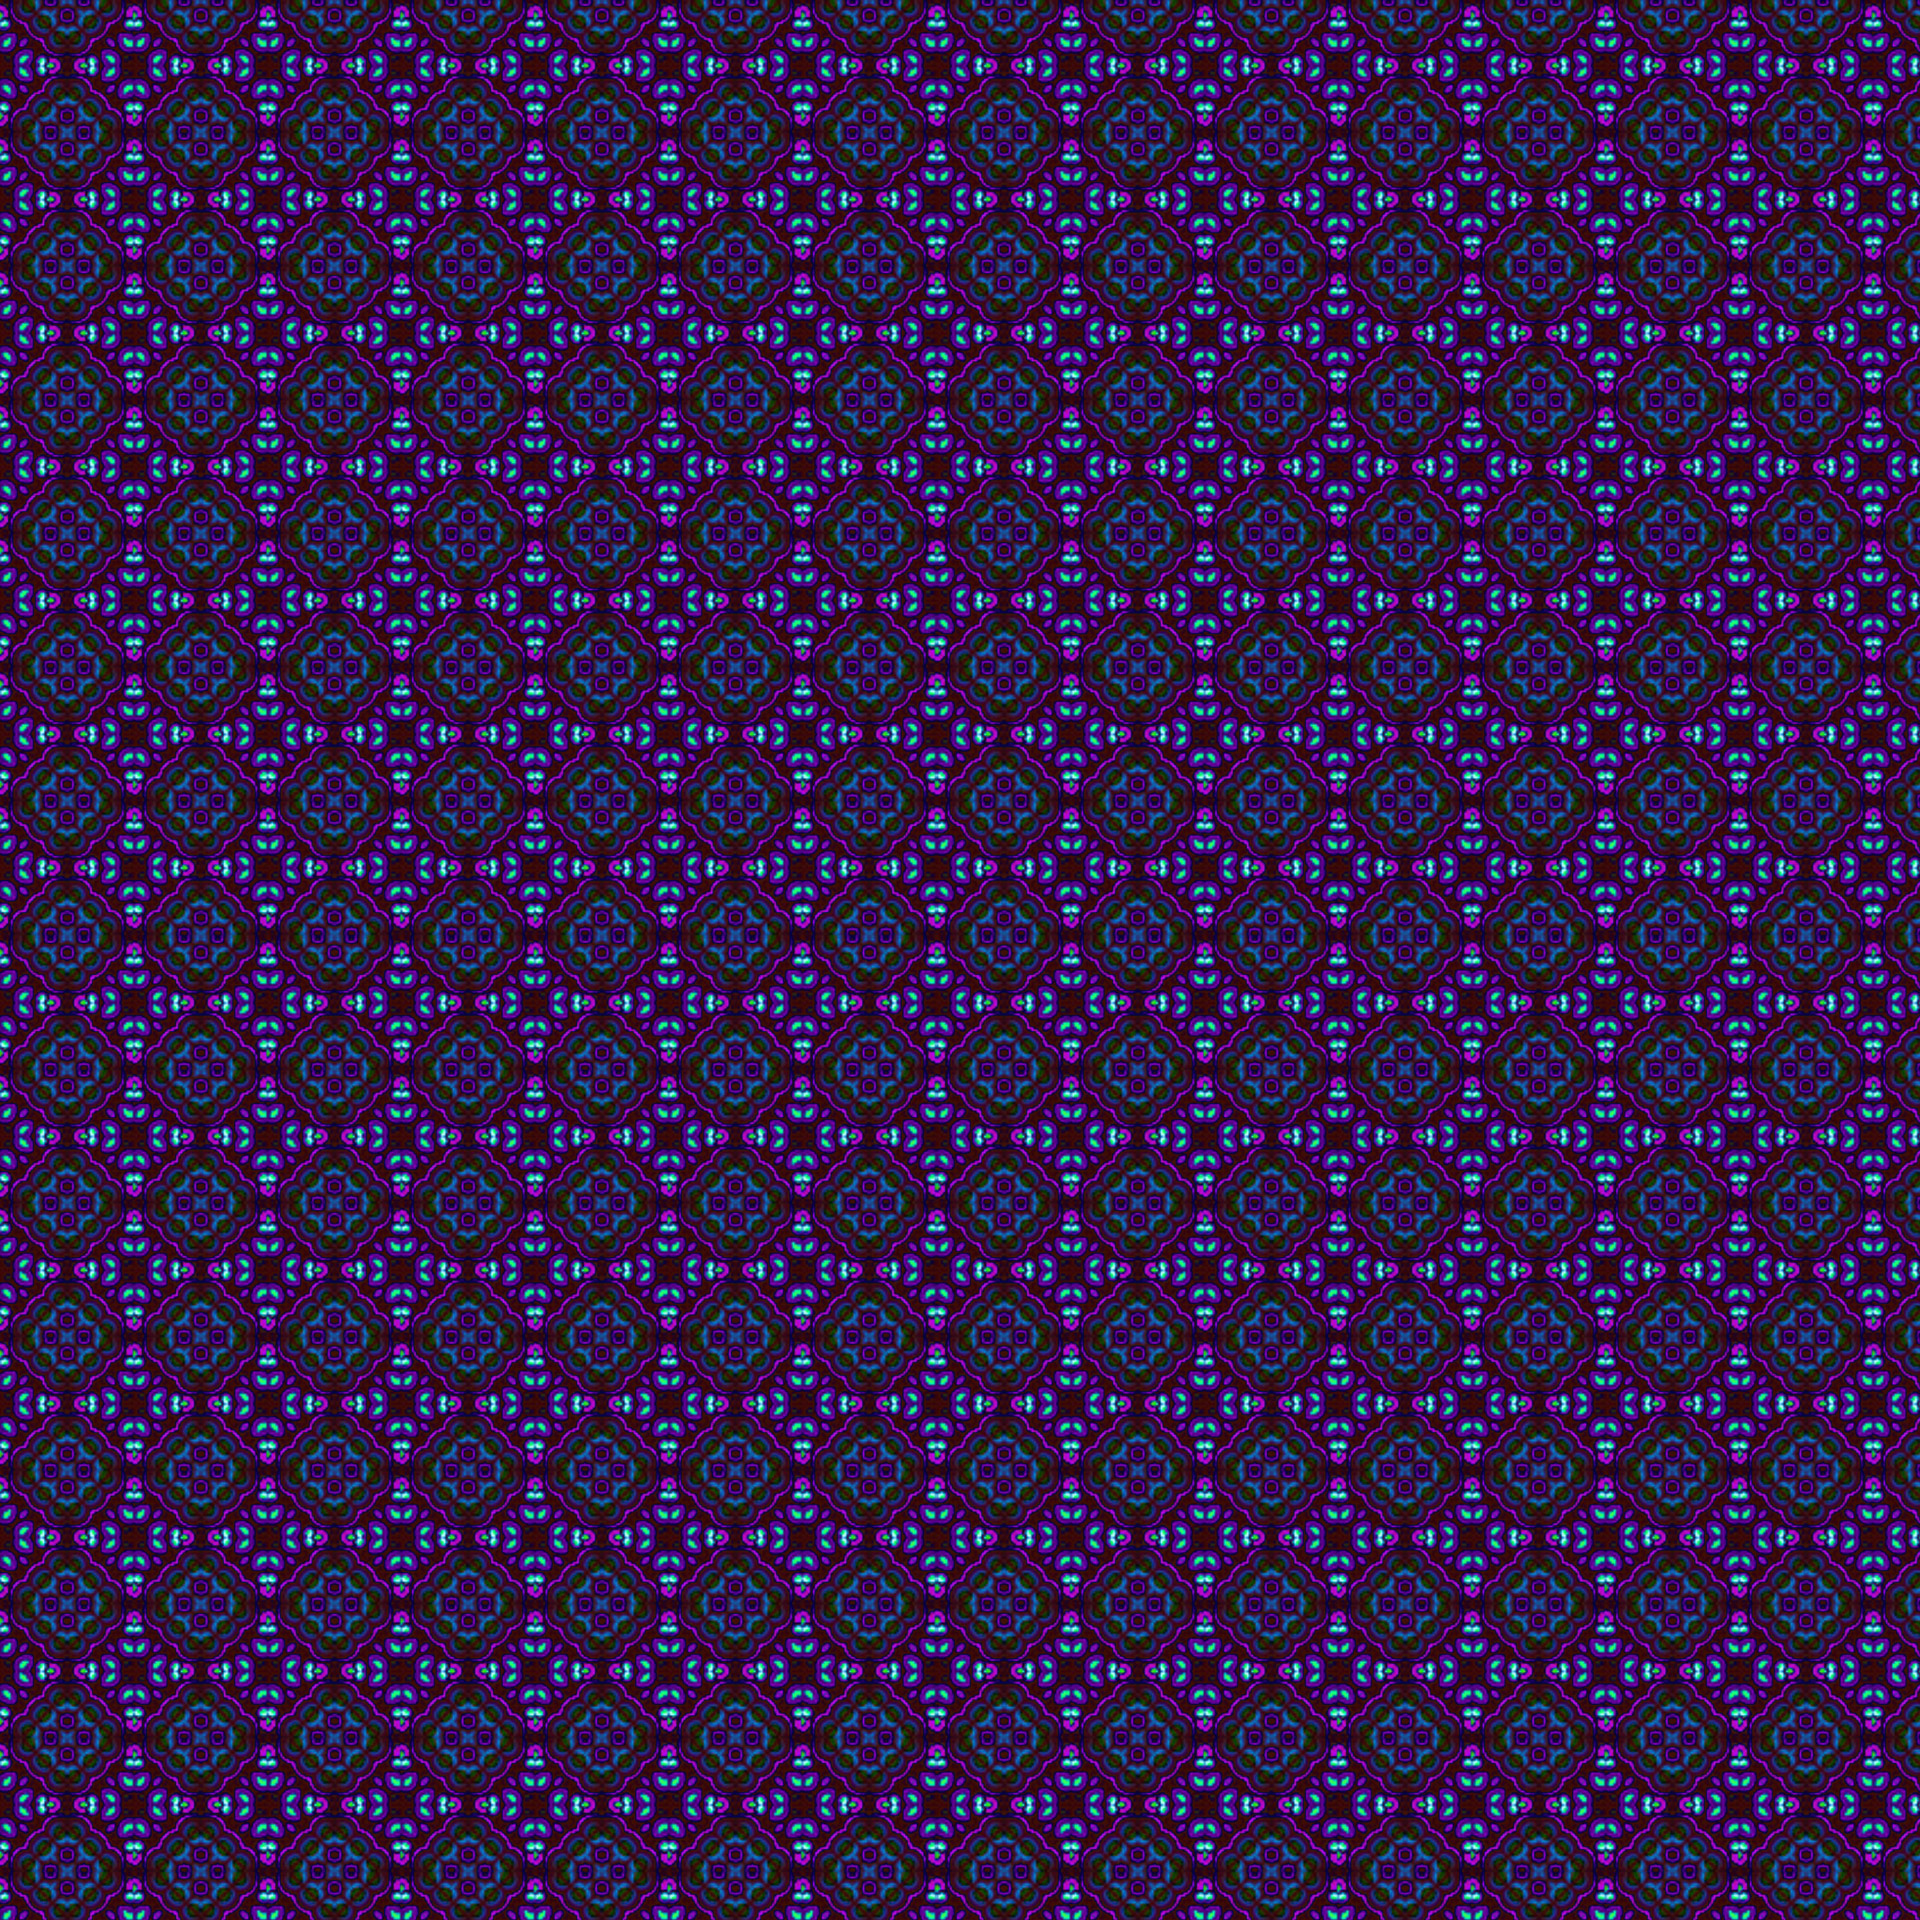 A blue and purple seamless tile design great for 3d images such as carpets rugs flooring